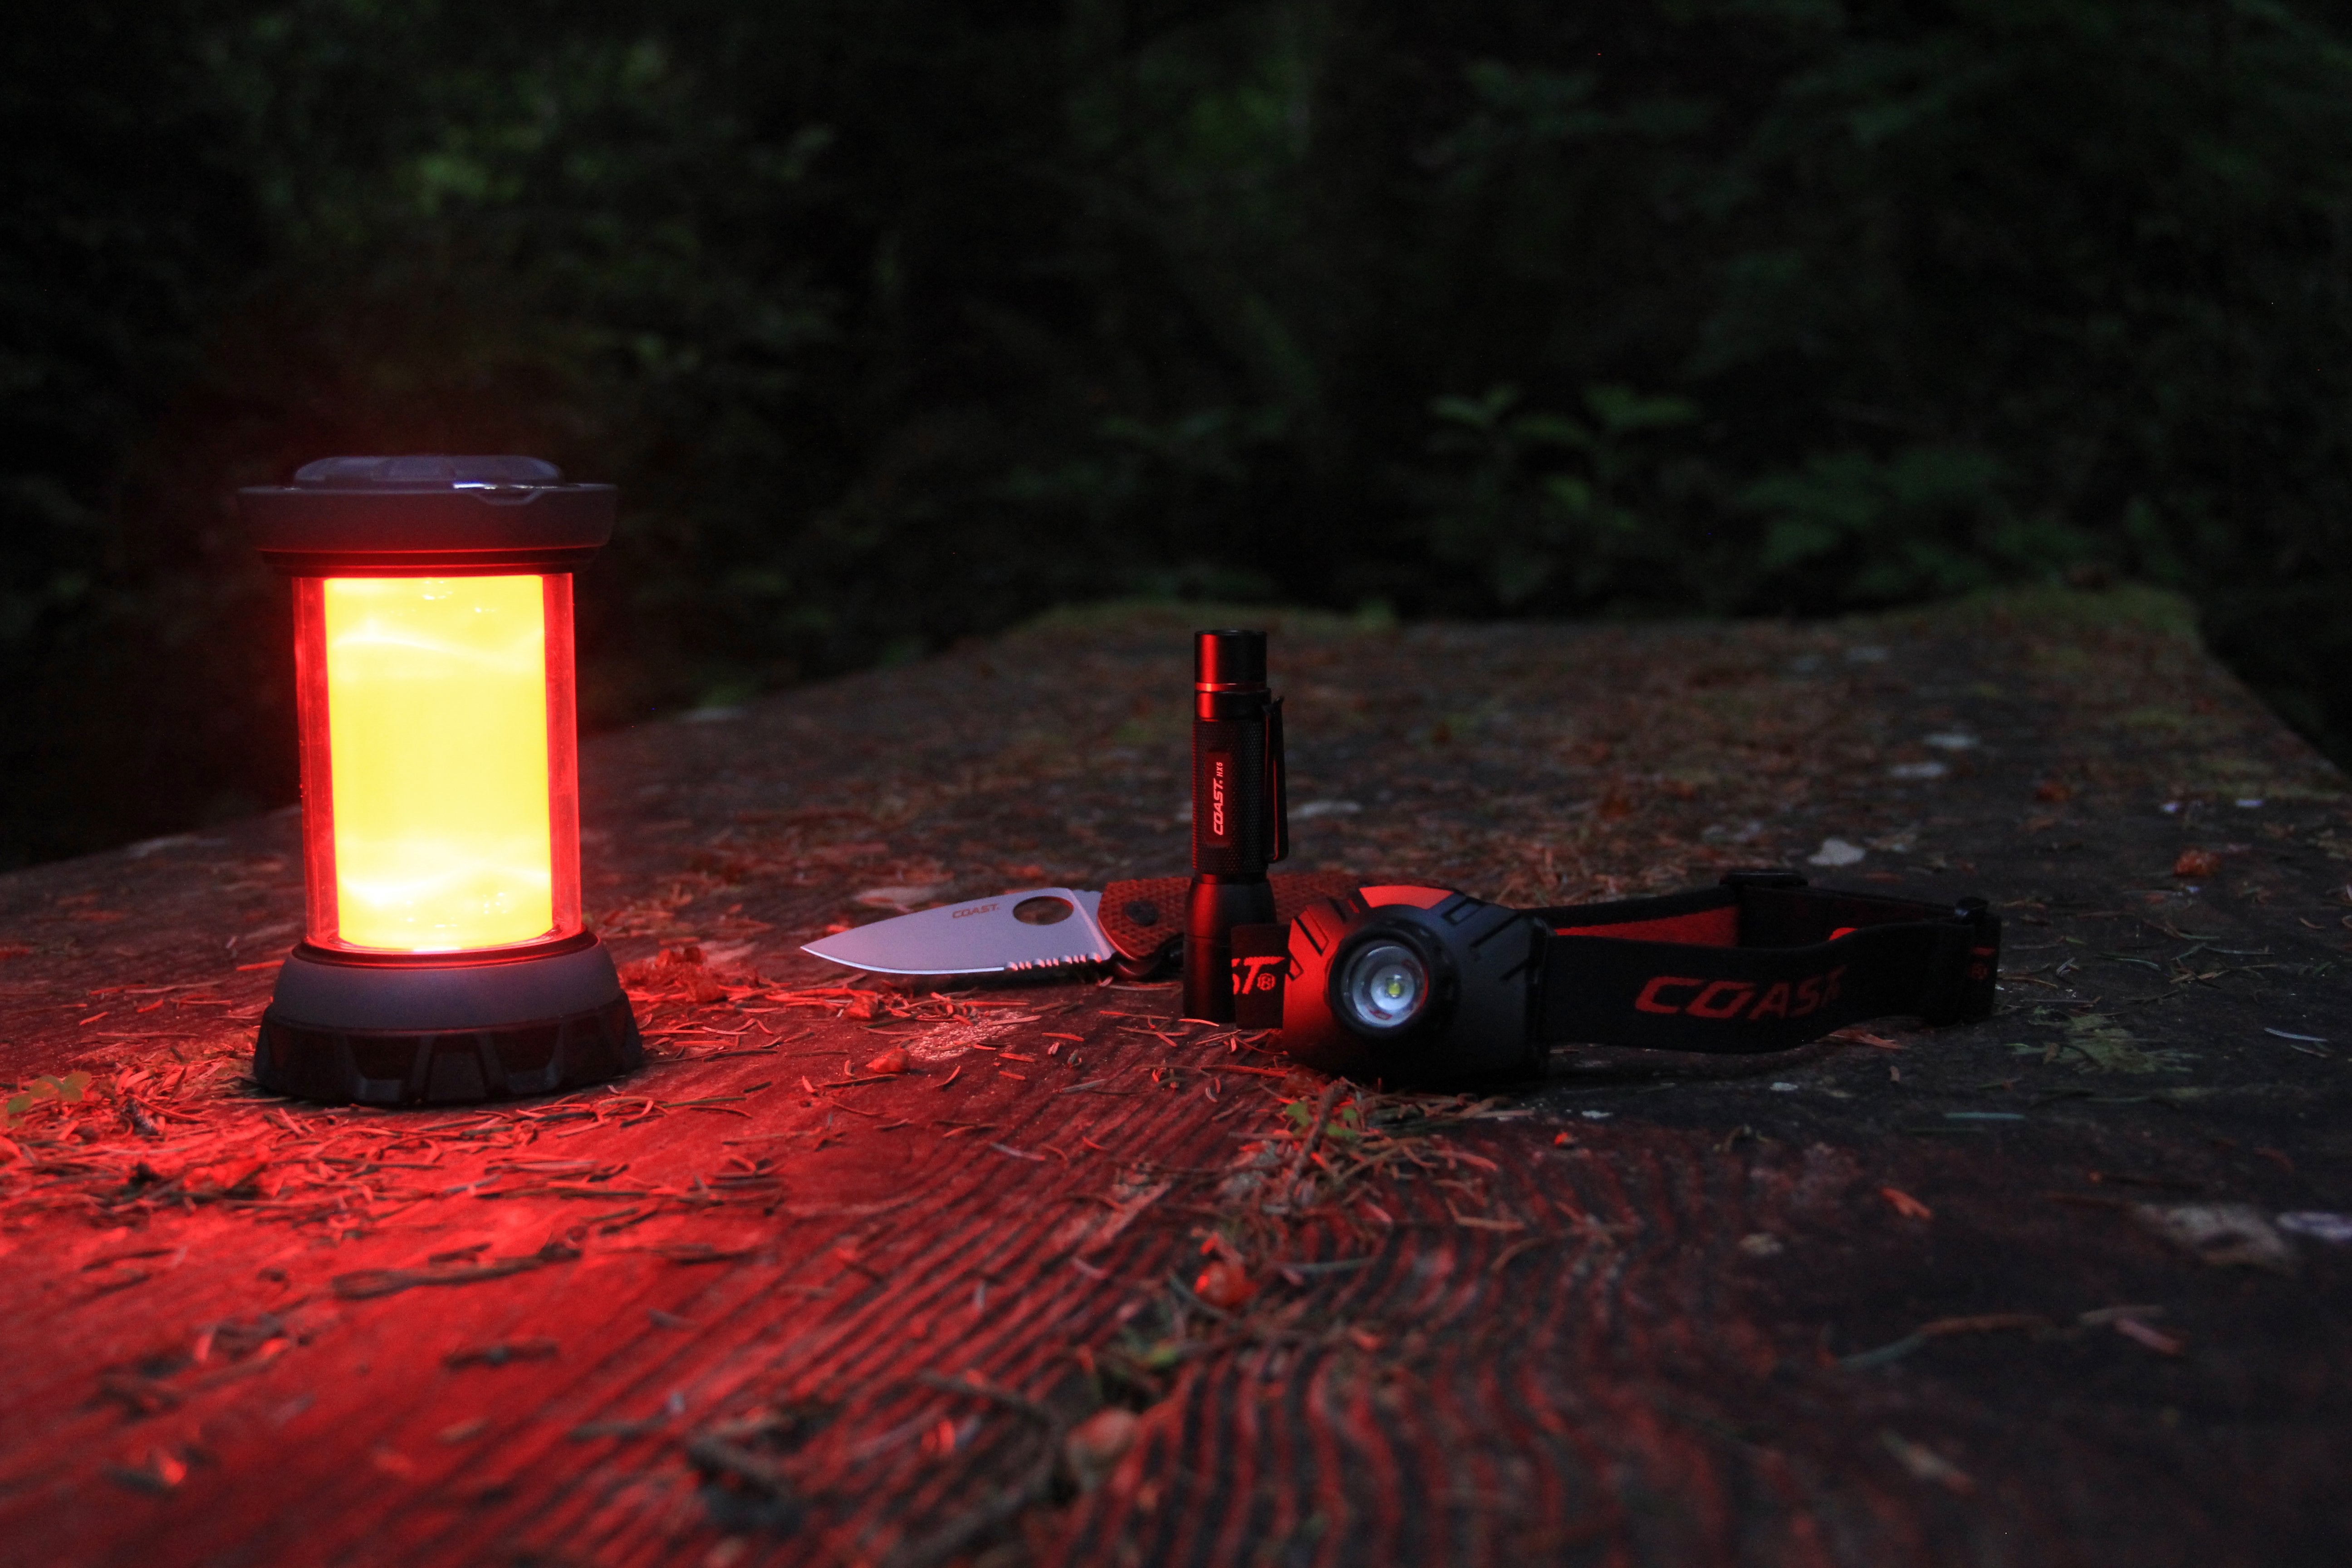 Lanterns, lamps, torches: Bright ideas to keep campsites illuminated